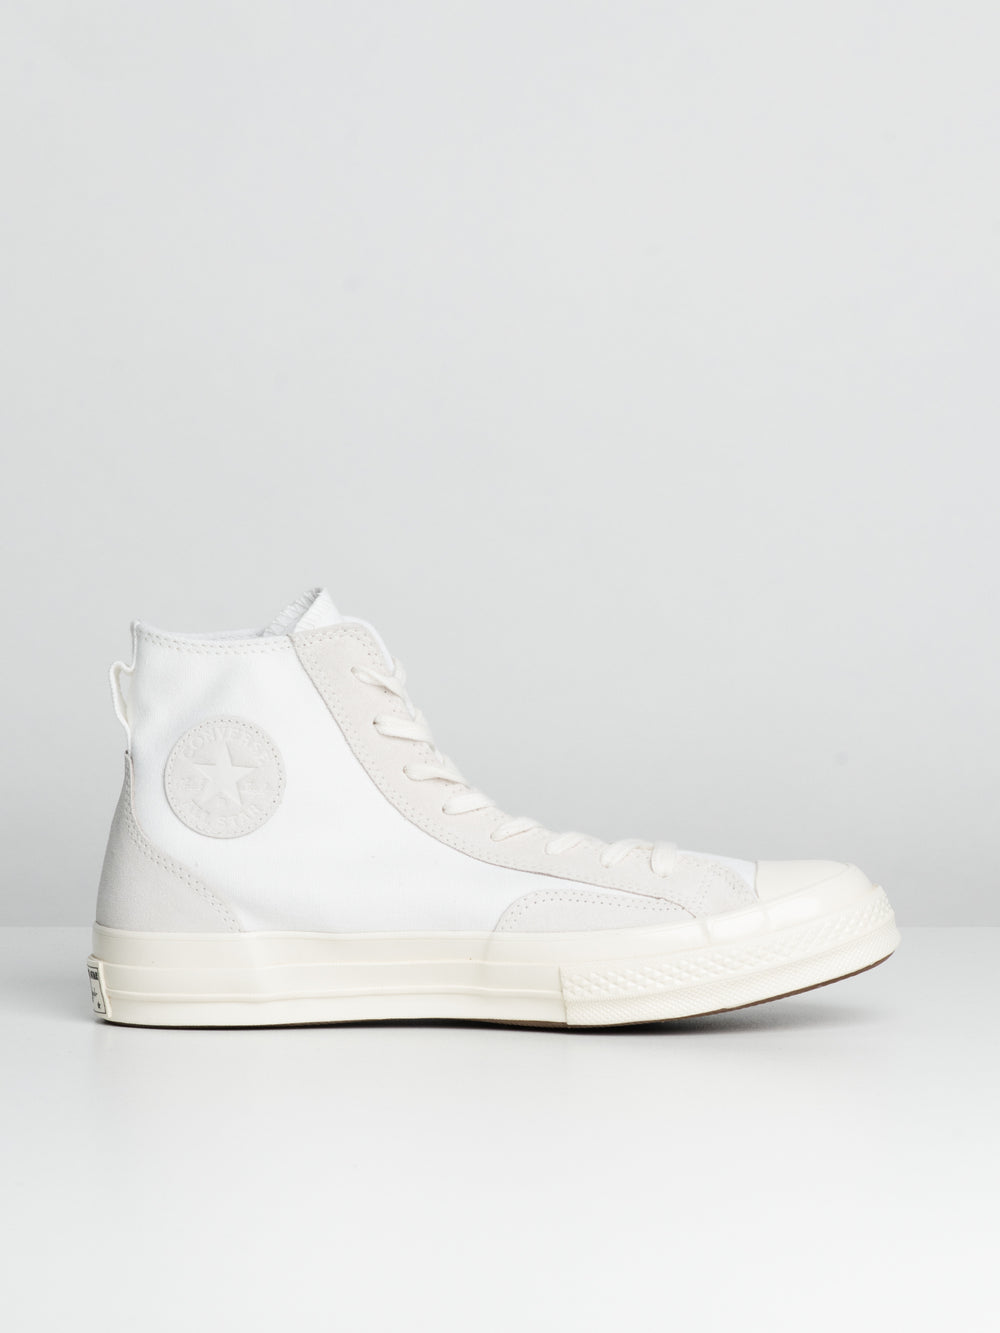 MENS CONVERSE CHUCK 70 HIGH TOP SNEAKERS - CLEARANCE